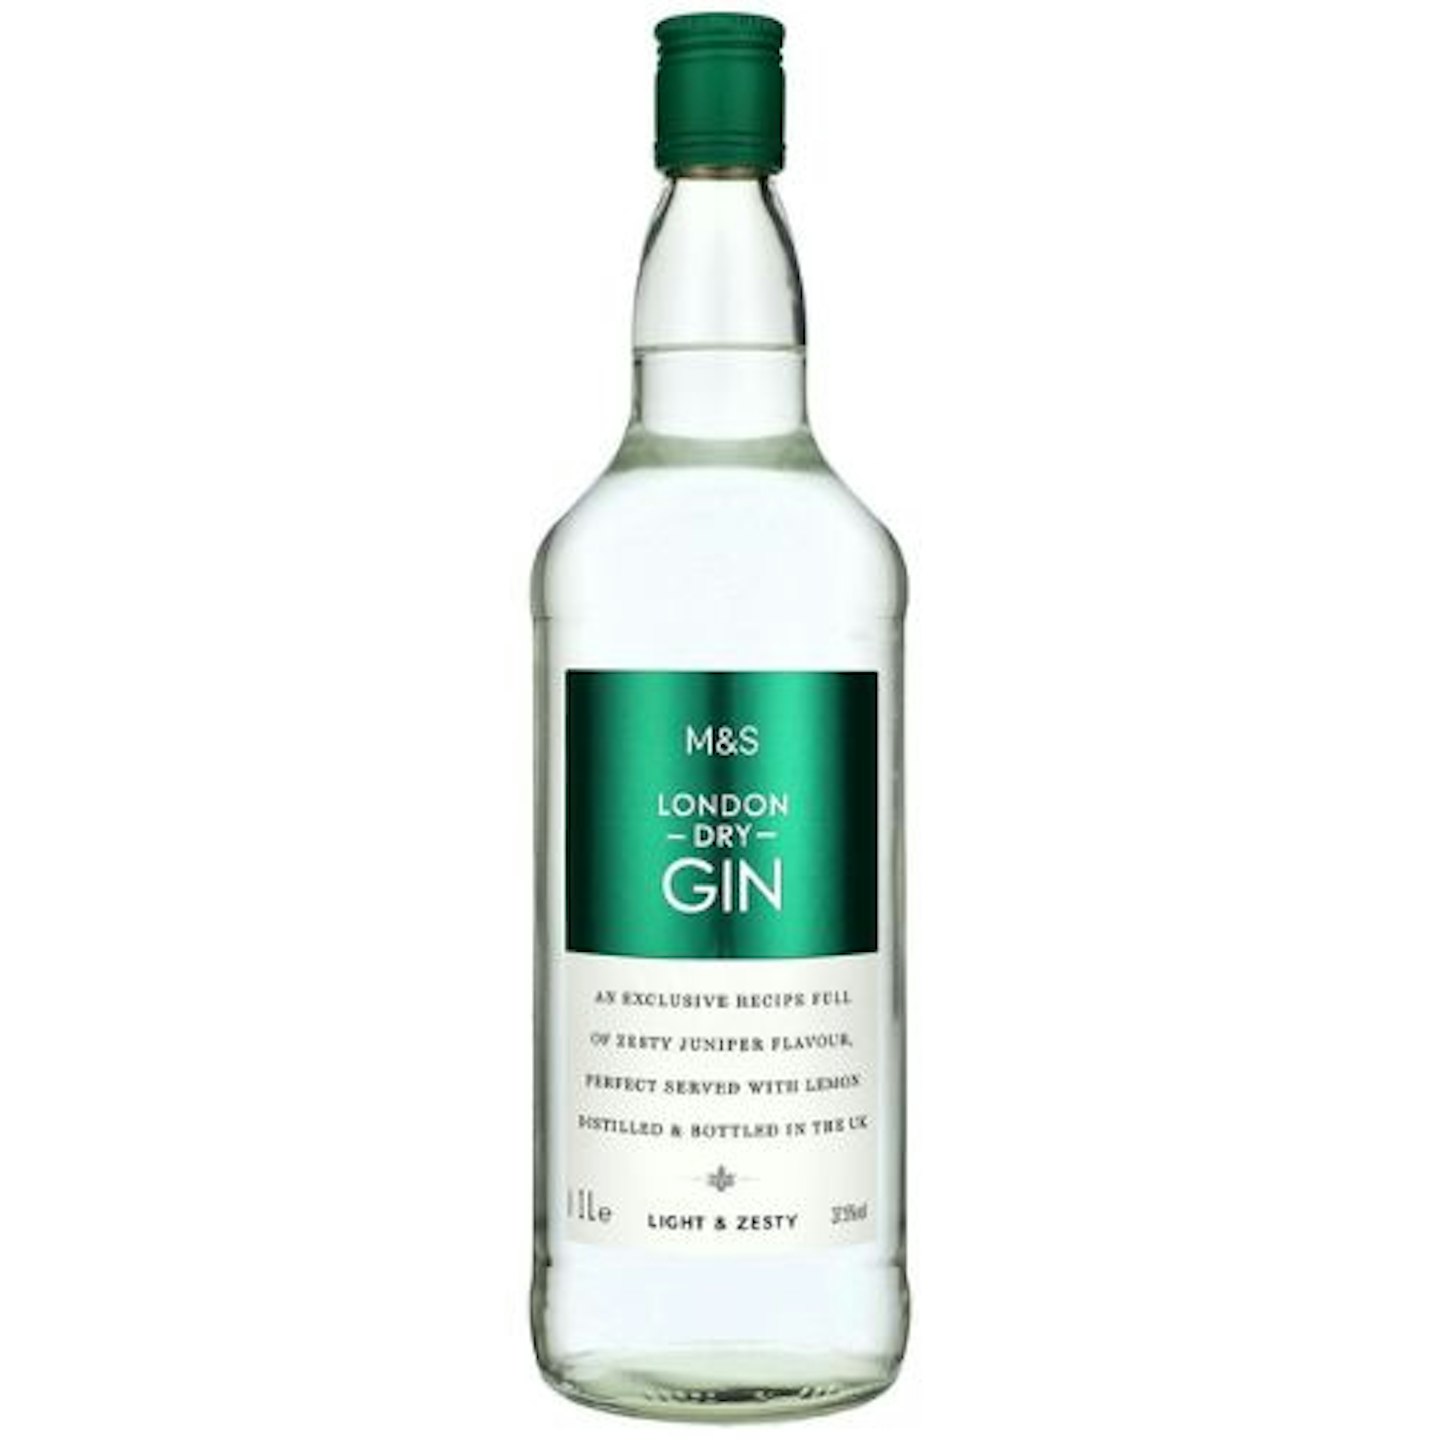 M&S London Dry Gin